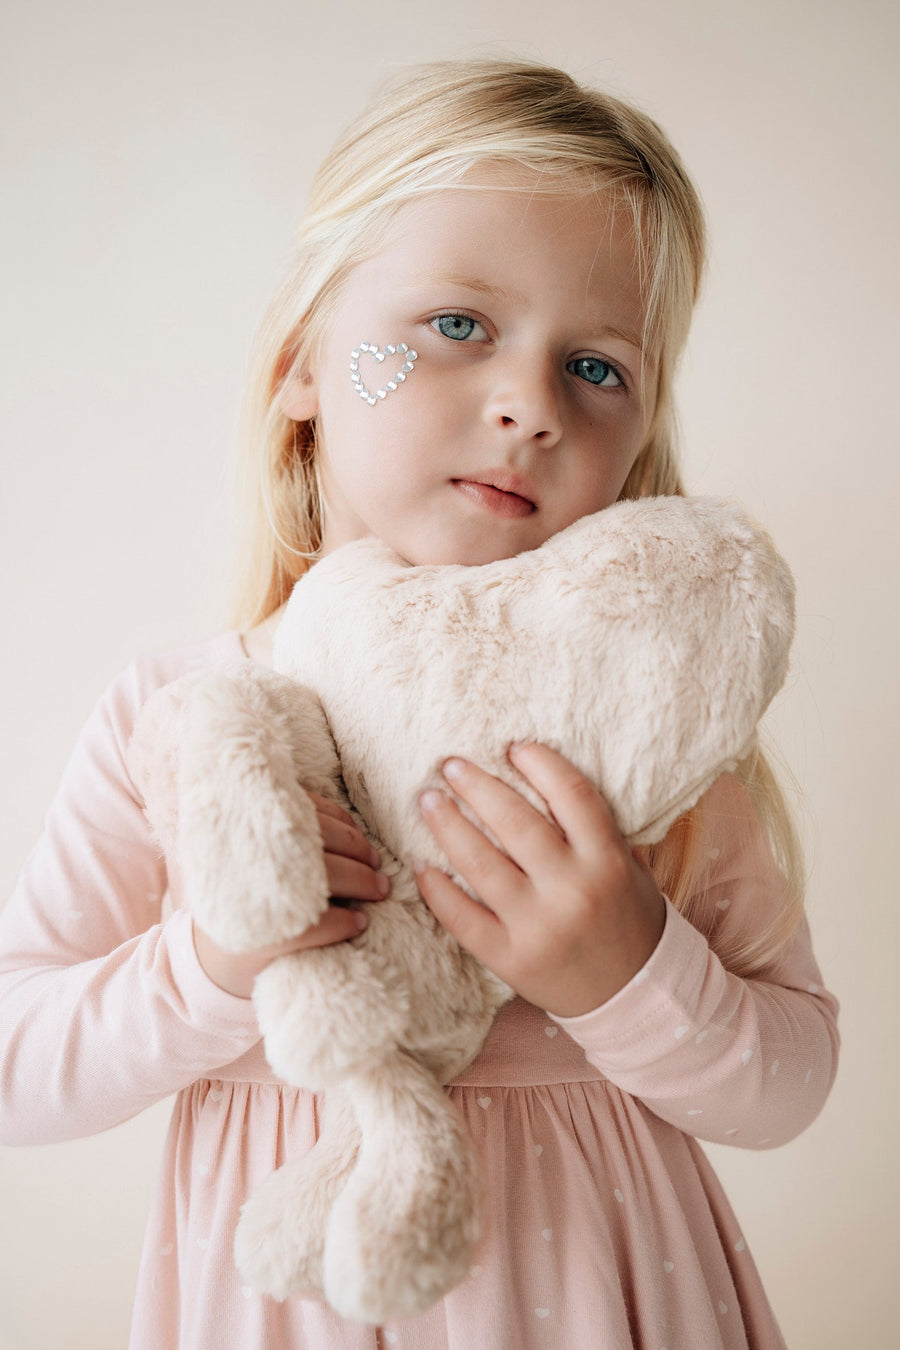 Snuggle Bunnies - Valentines Day - Brulee Childrens Toy from Jamie Kay NZ